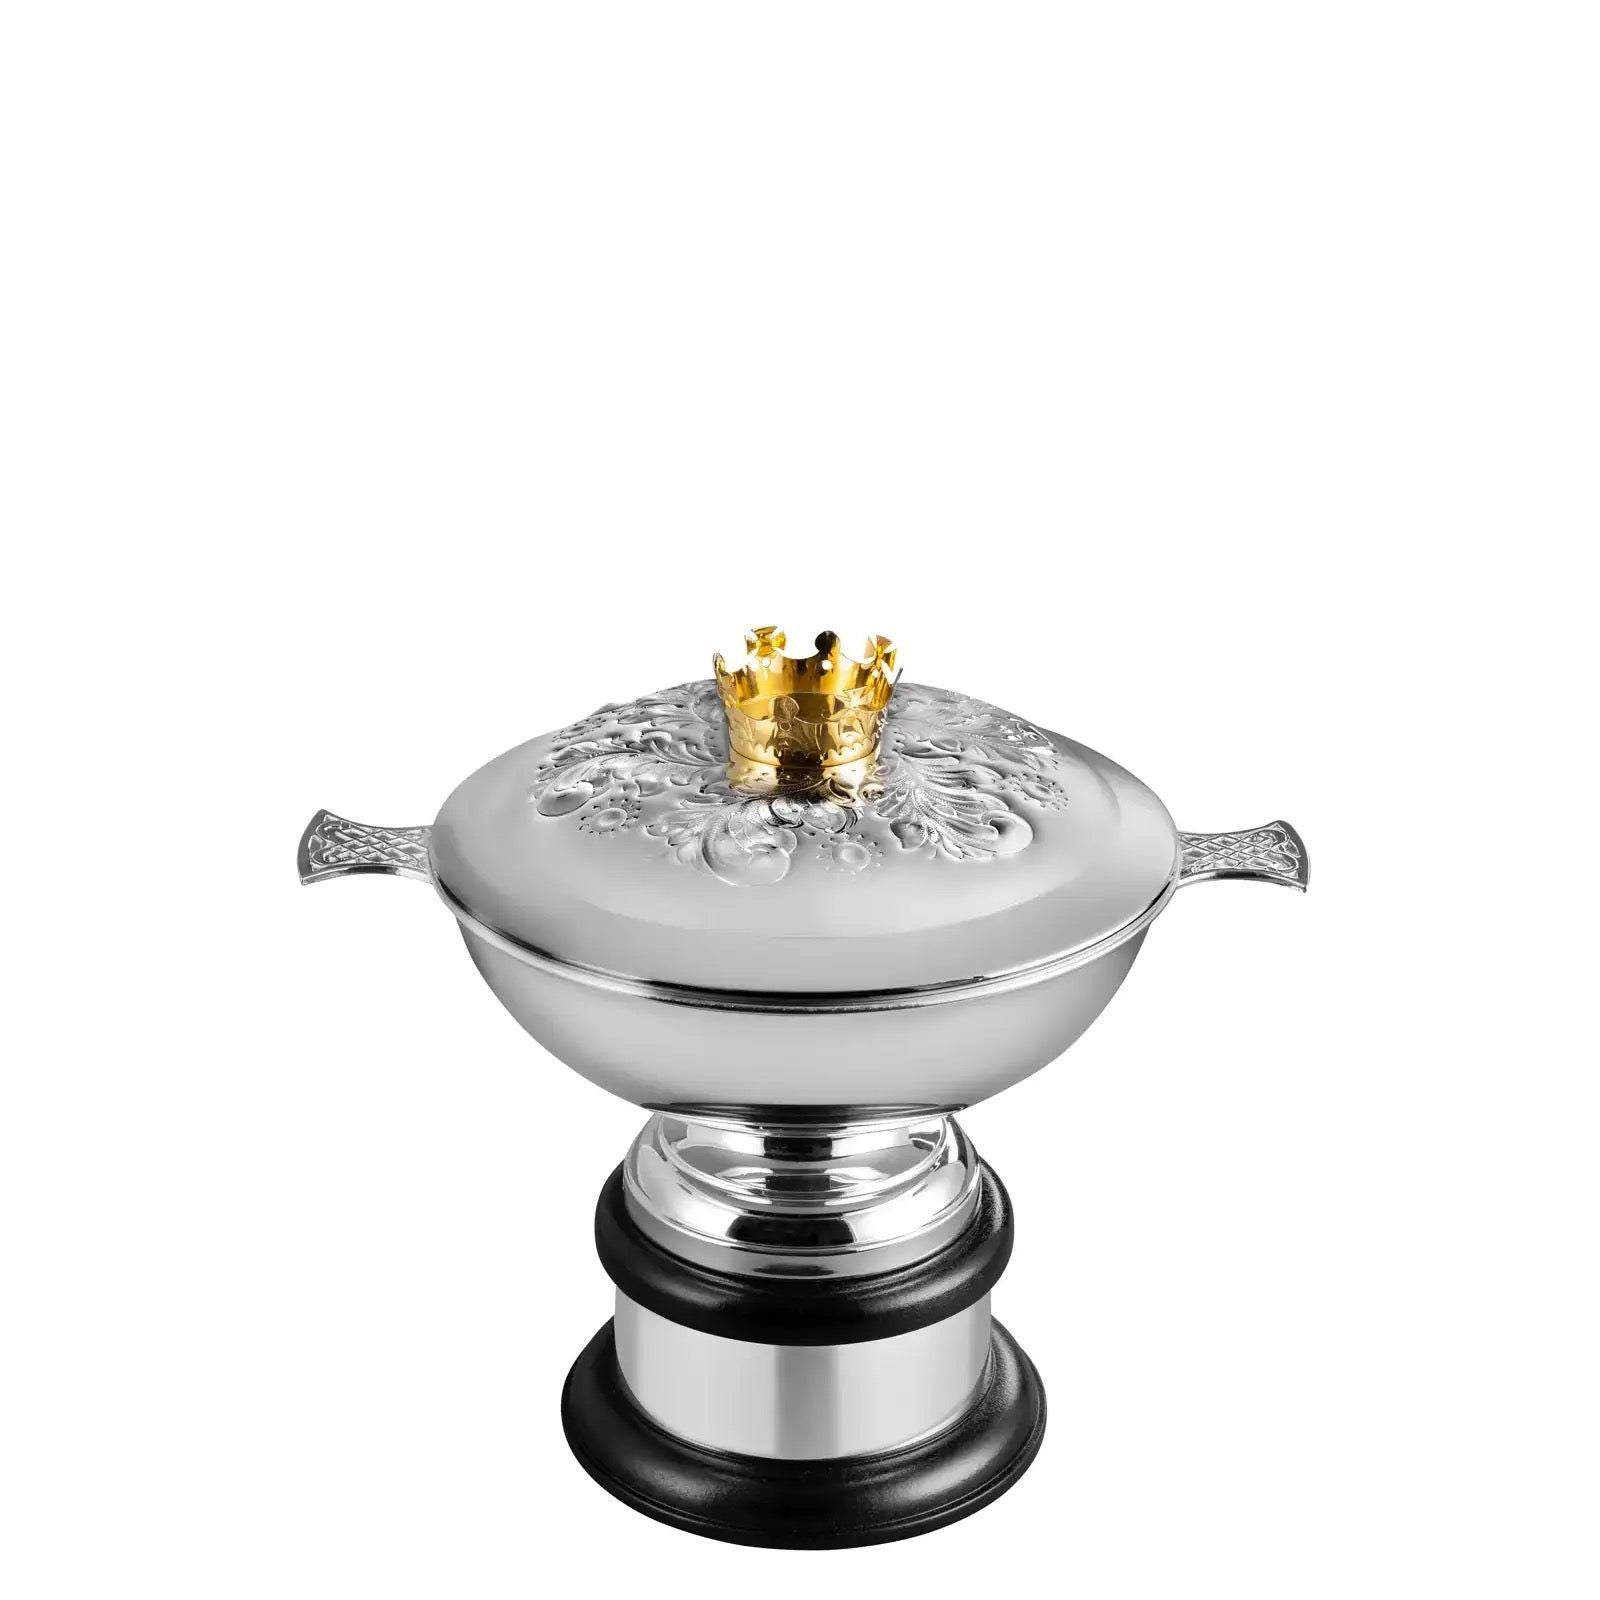 Silver and Gold Plated 10.75in Highlands Quaich Trophy Cup - With Hand Chased Detailing